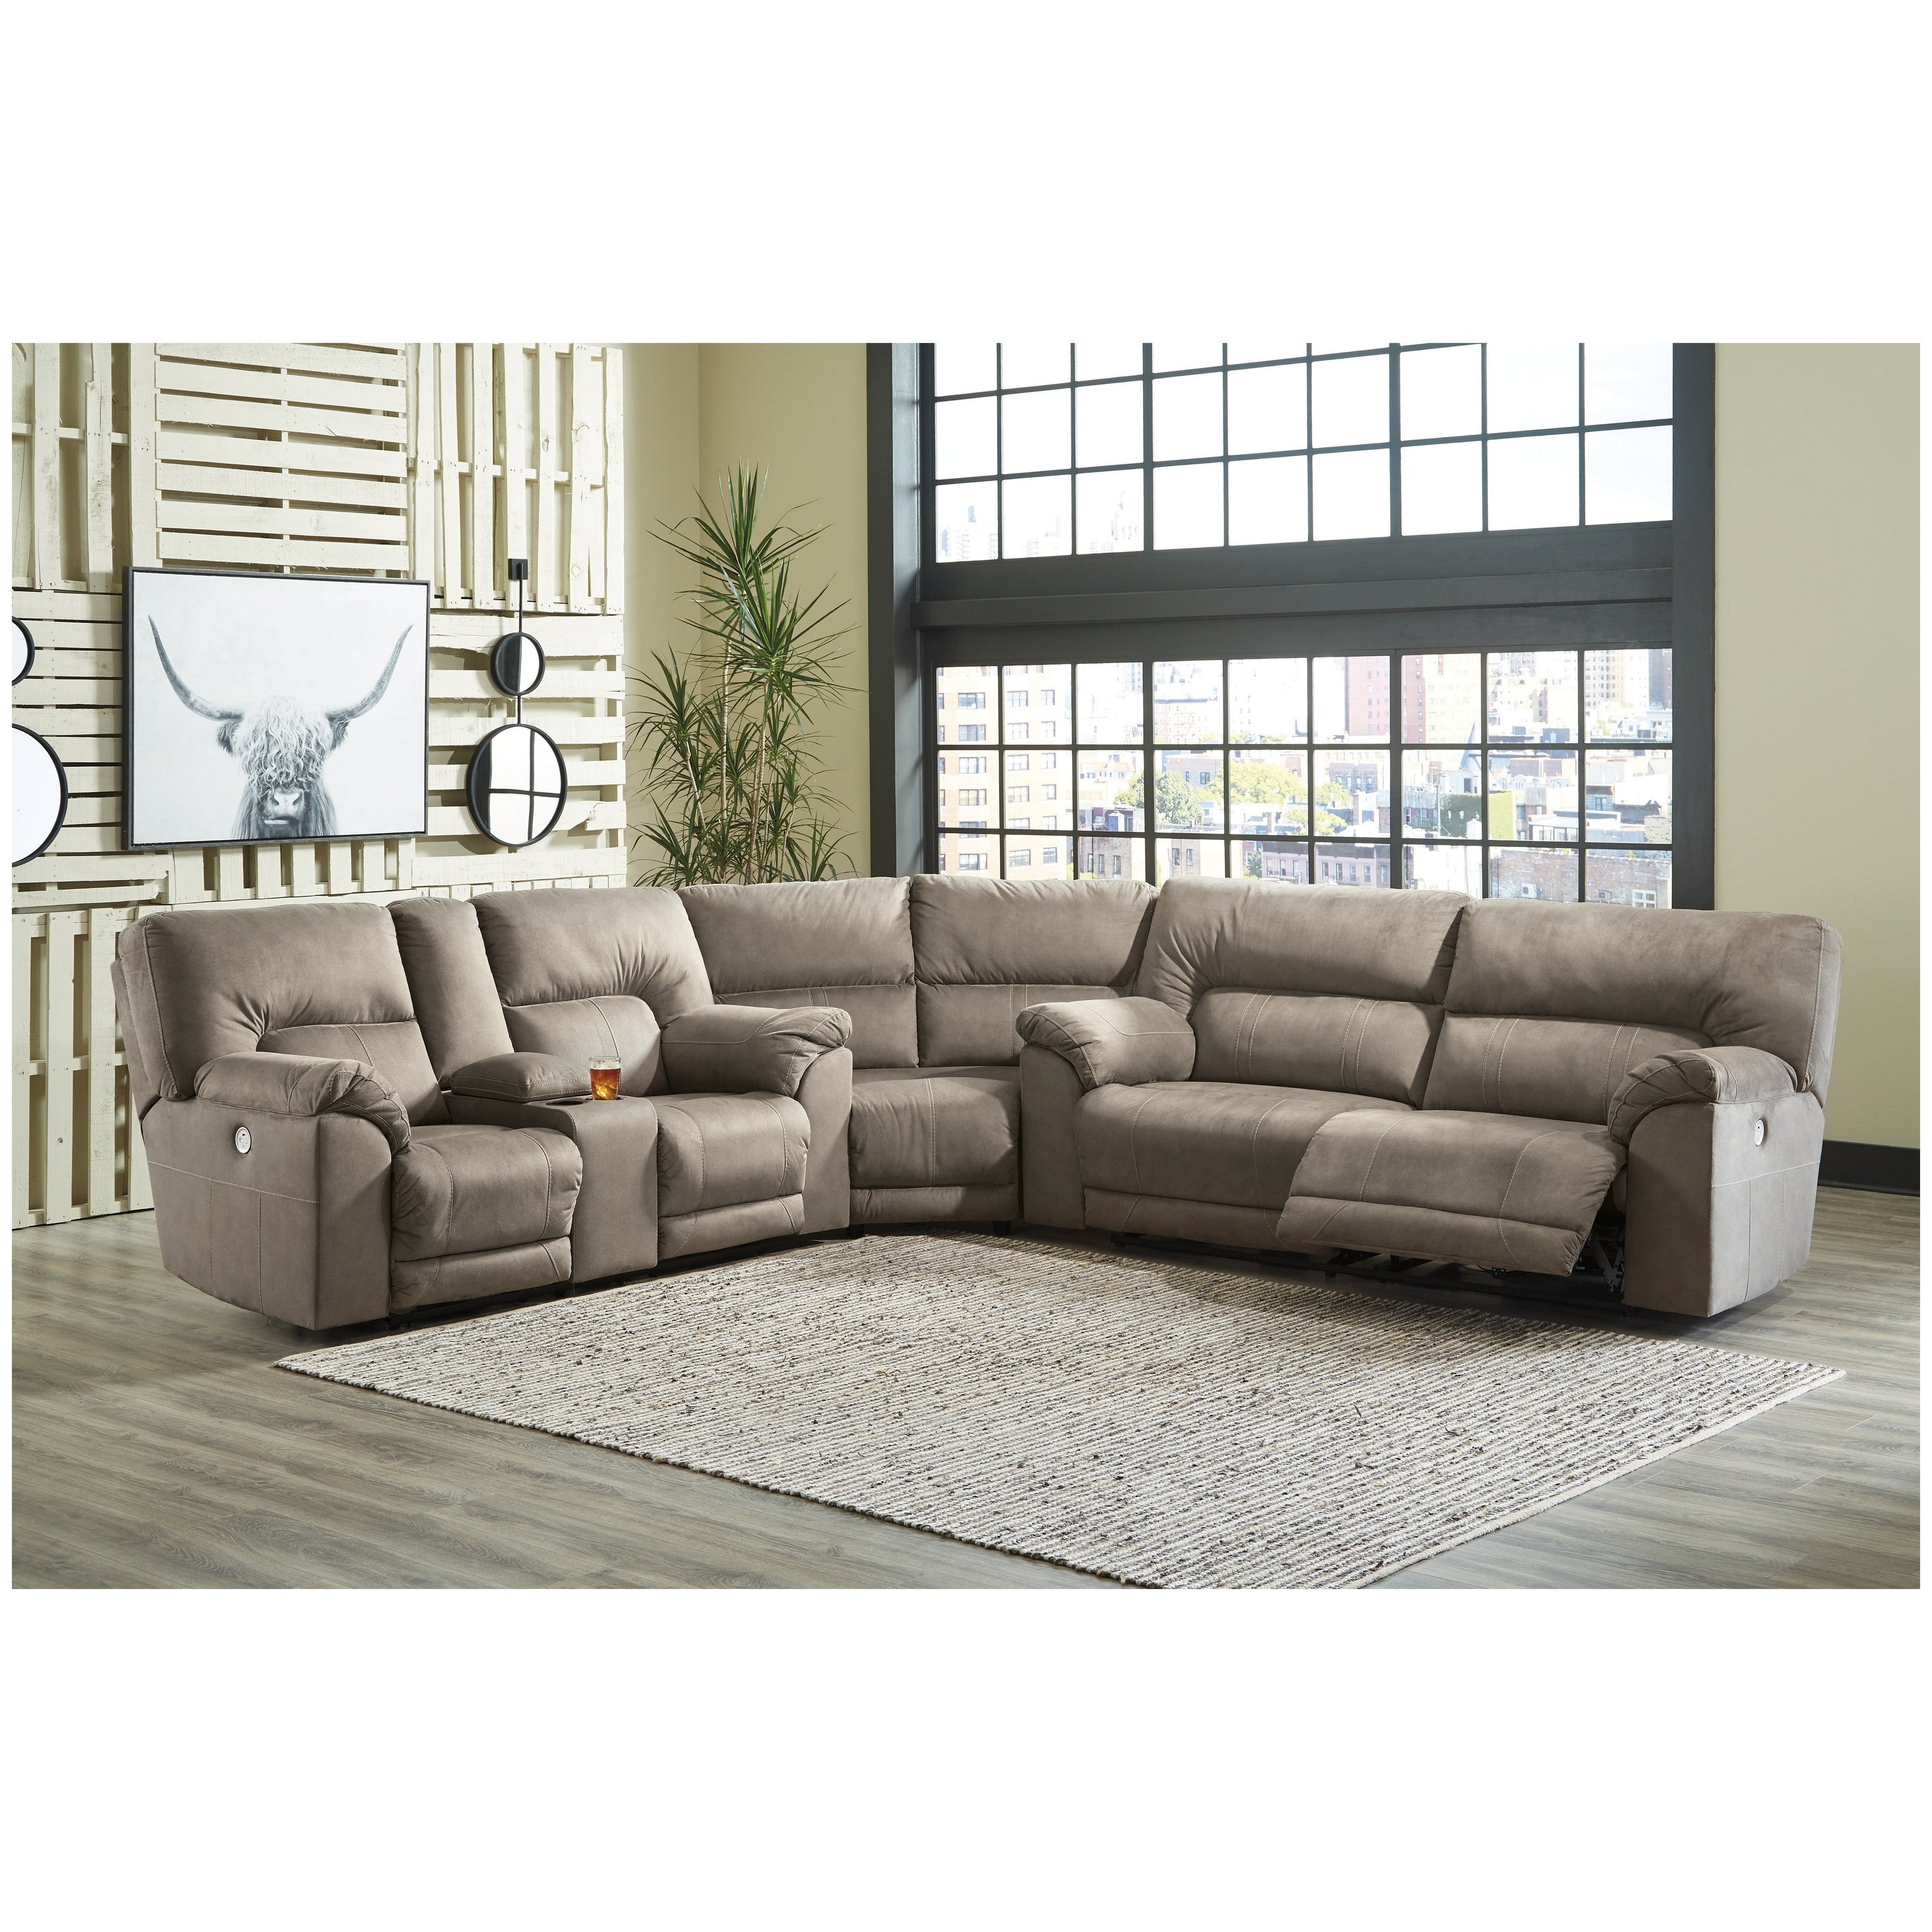 Cavalcade 3-Piece Power Reclining Sectional Ash-77601S1